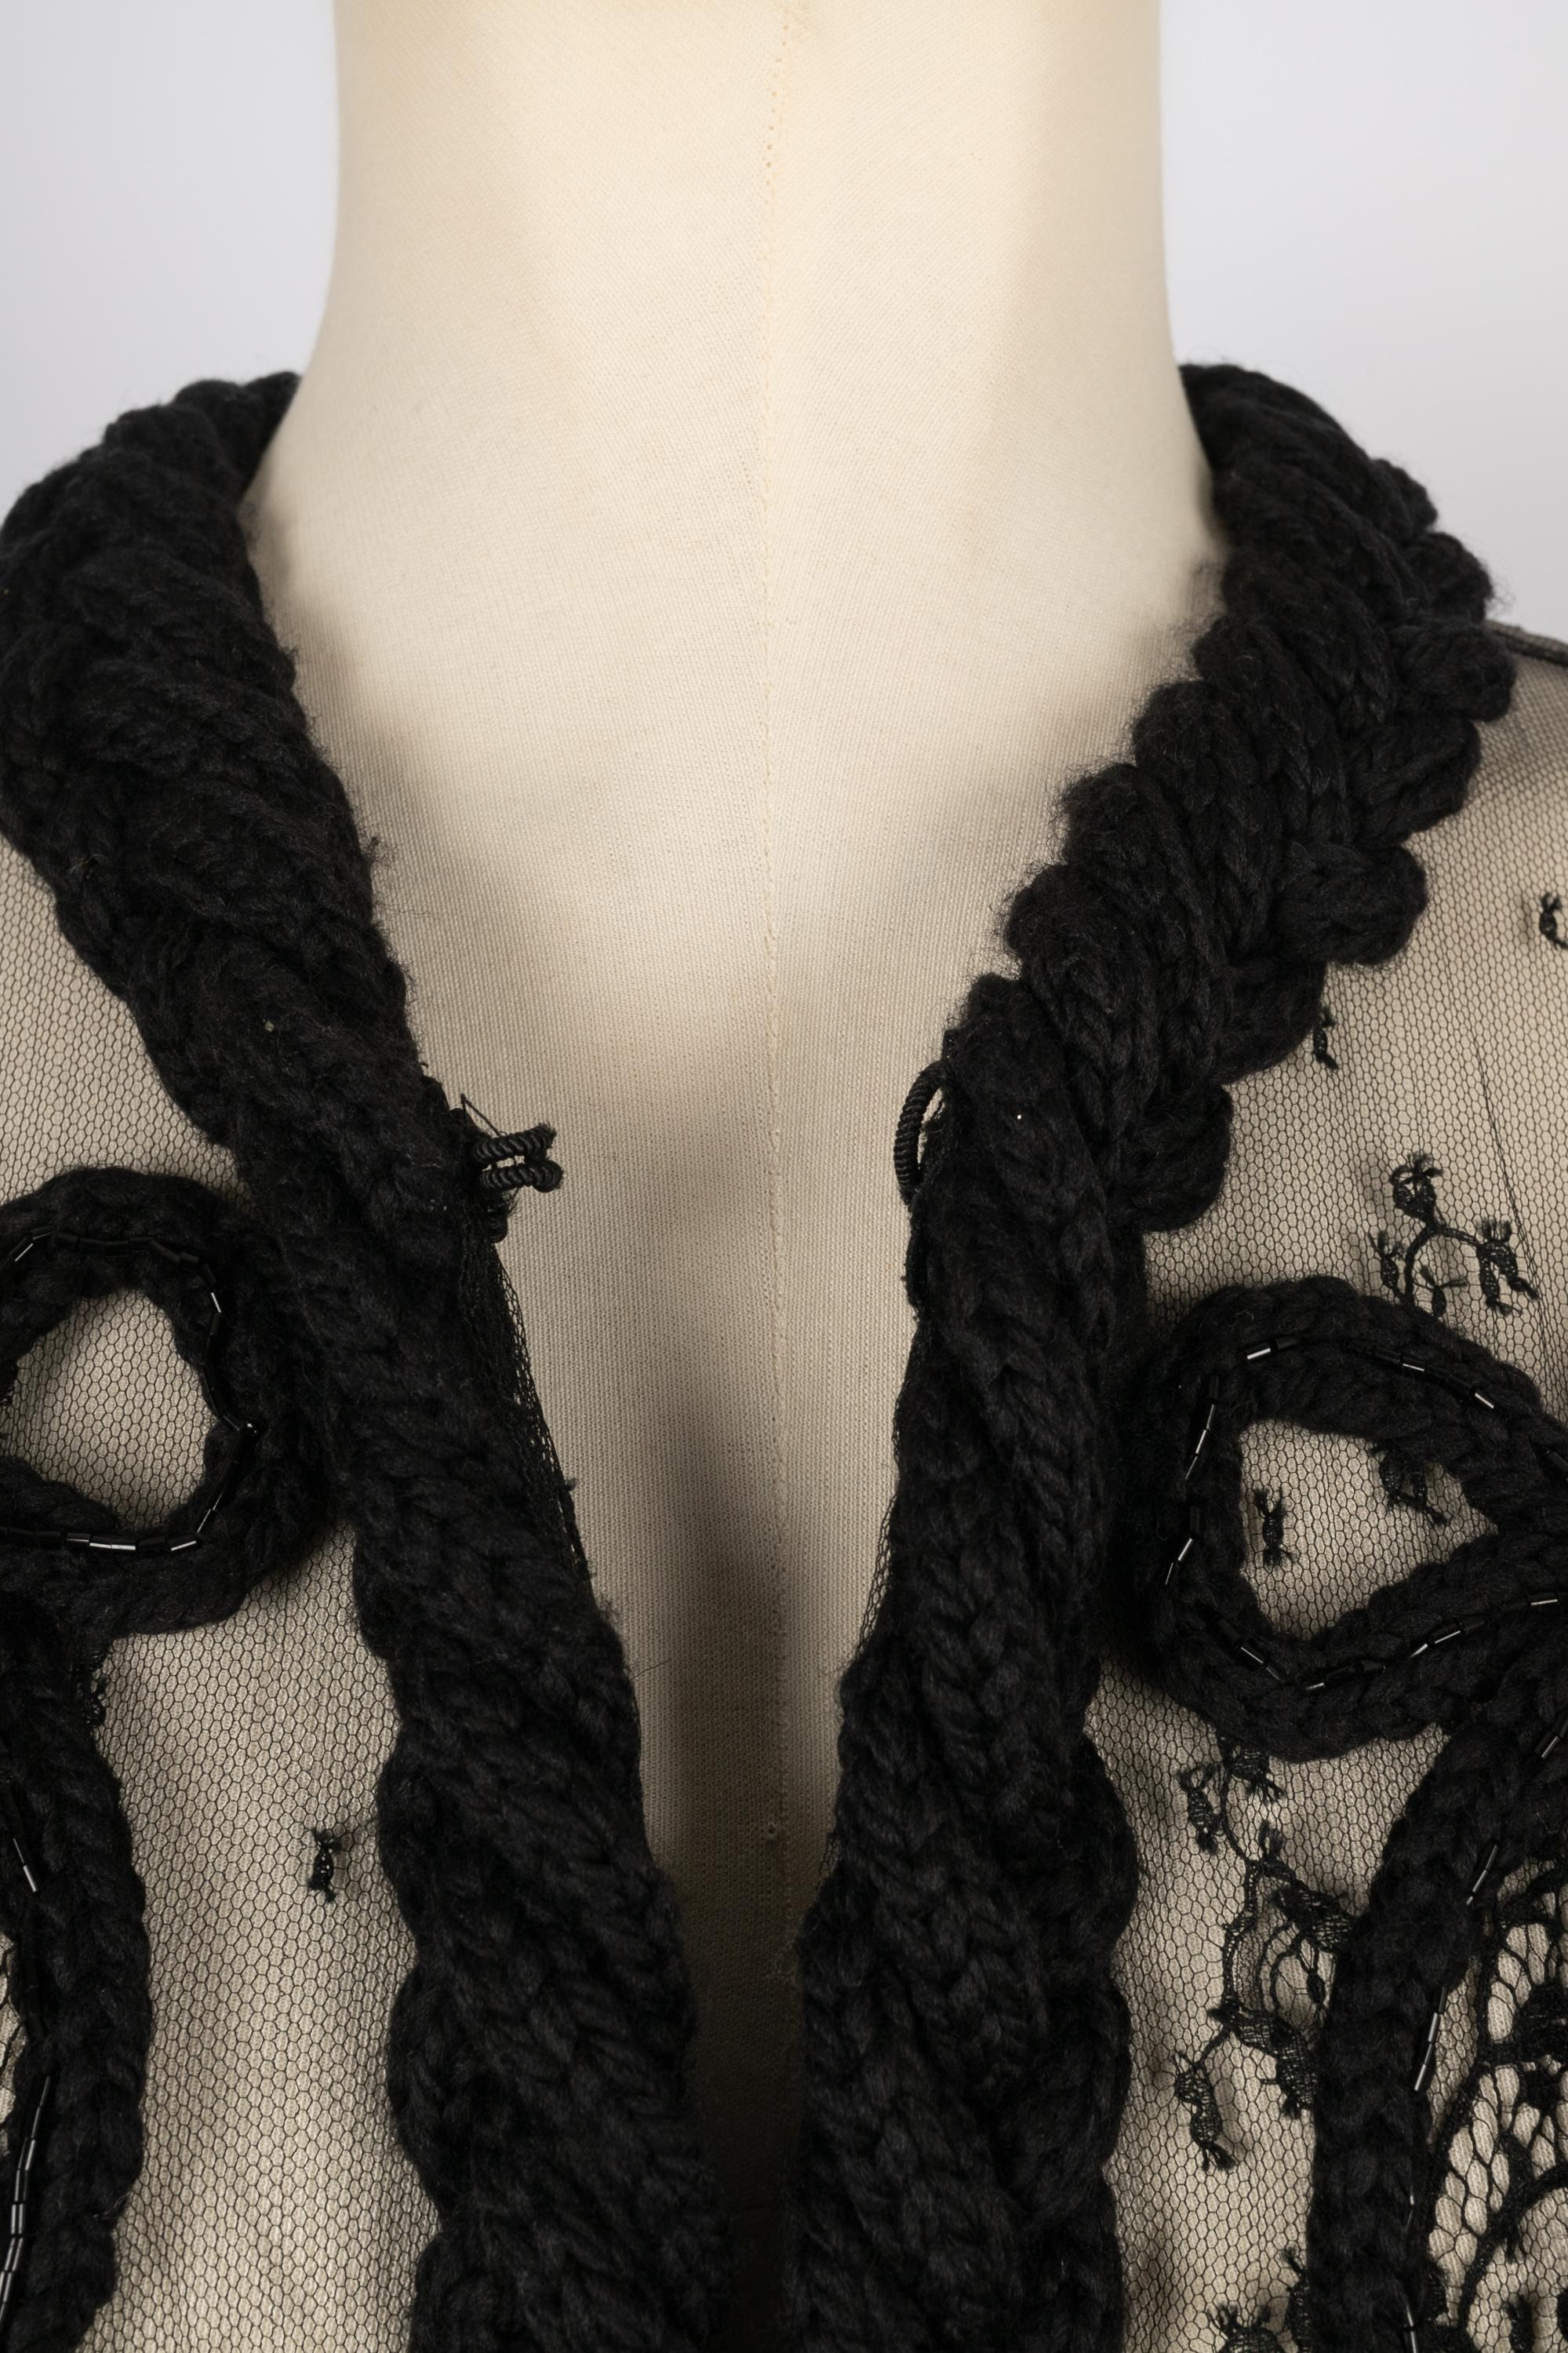 DIOR - (Made in Italy) Black lace cardigan edged with braided wool mesh and embroidered with black glass pearls. Size 38FR.

Condition:
Very good condition

Dimensions:
Shoulder width: 37 cm - Chest: 45 cm - Sleeve length: 48 cm - Length: 81 cm

FV97